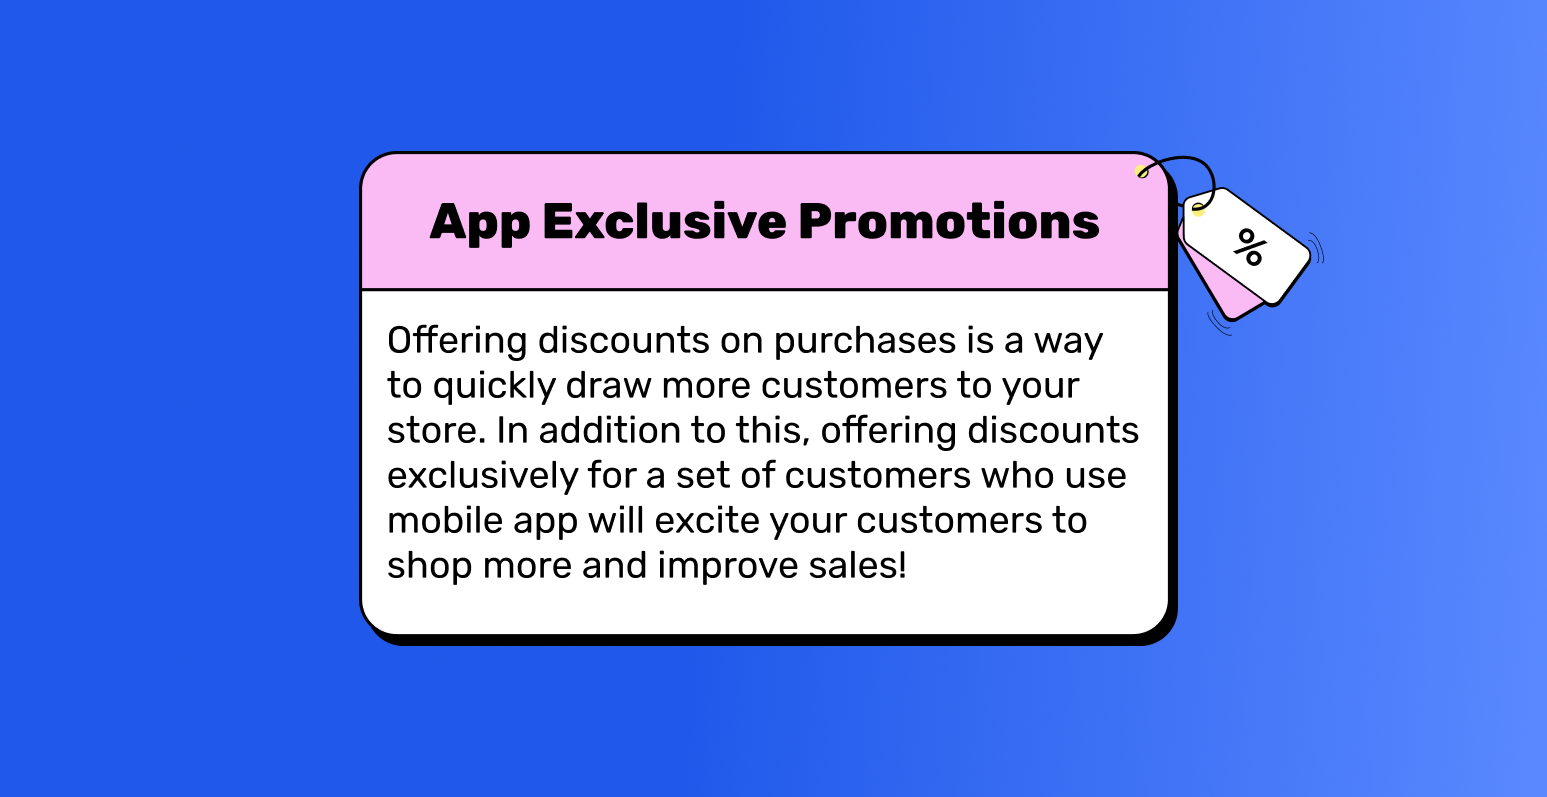 The image showcases a box labeled "App Exclusive Promotions" along with a description below it.